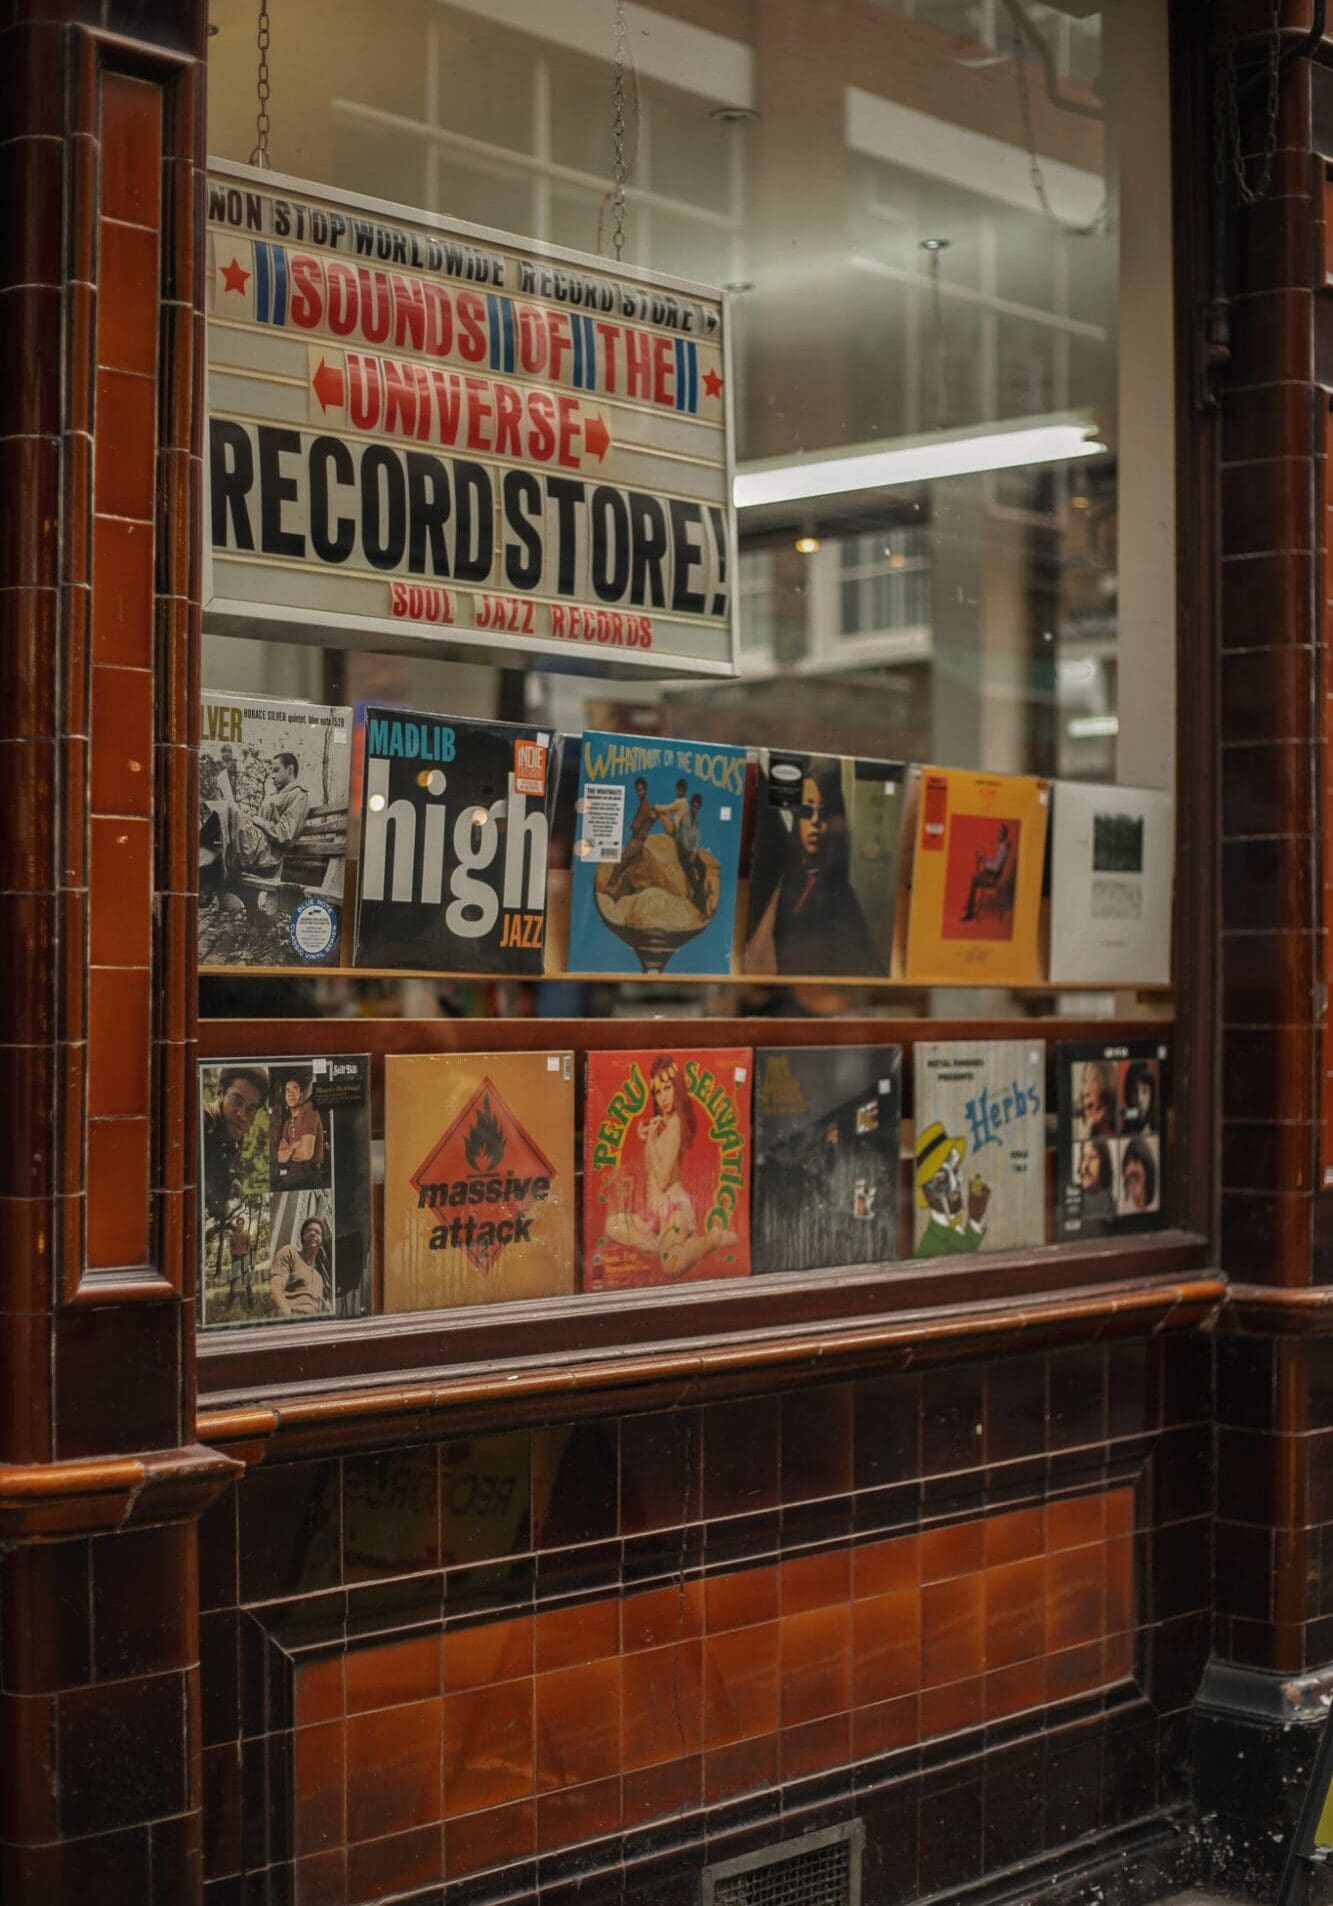 A window display featuring vinyl records in Soho